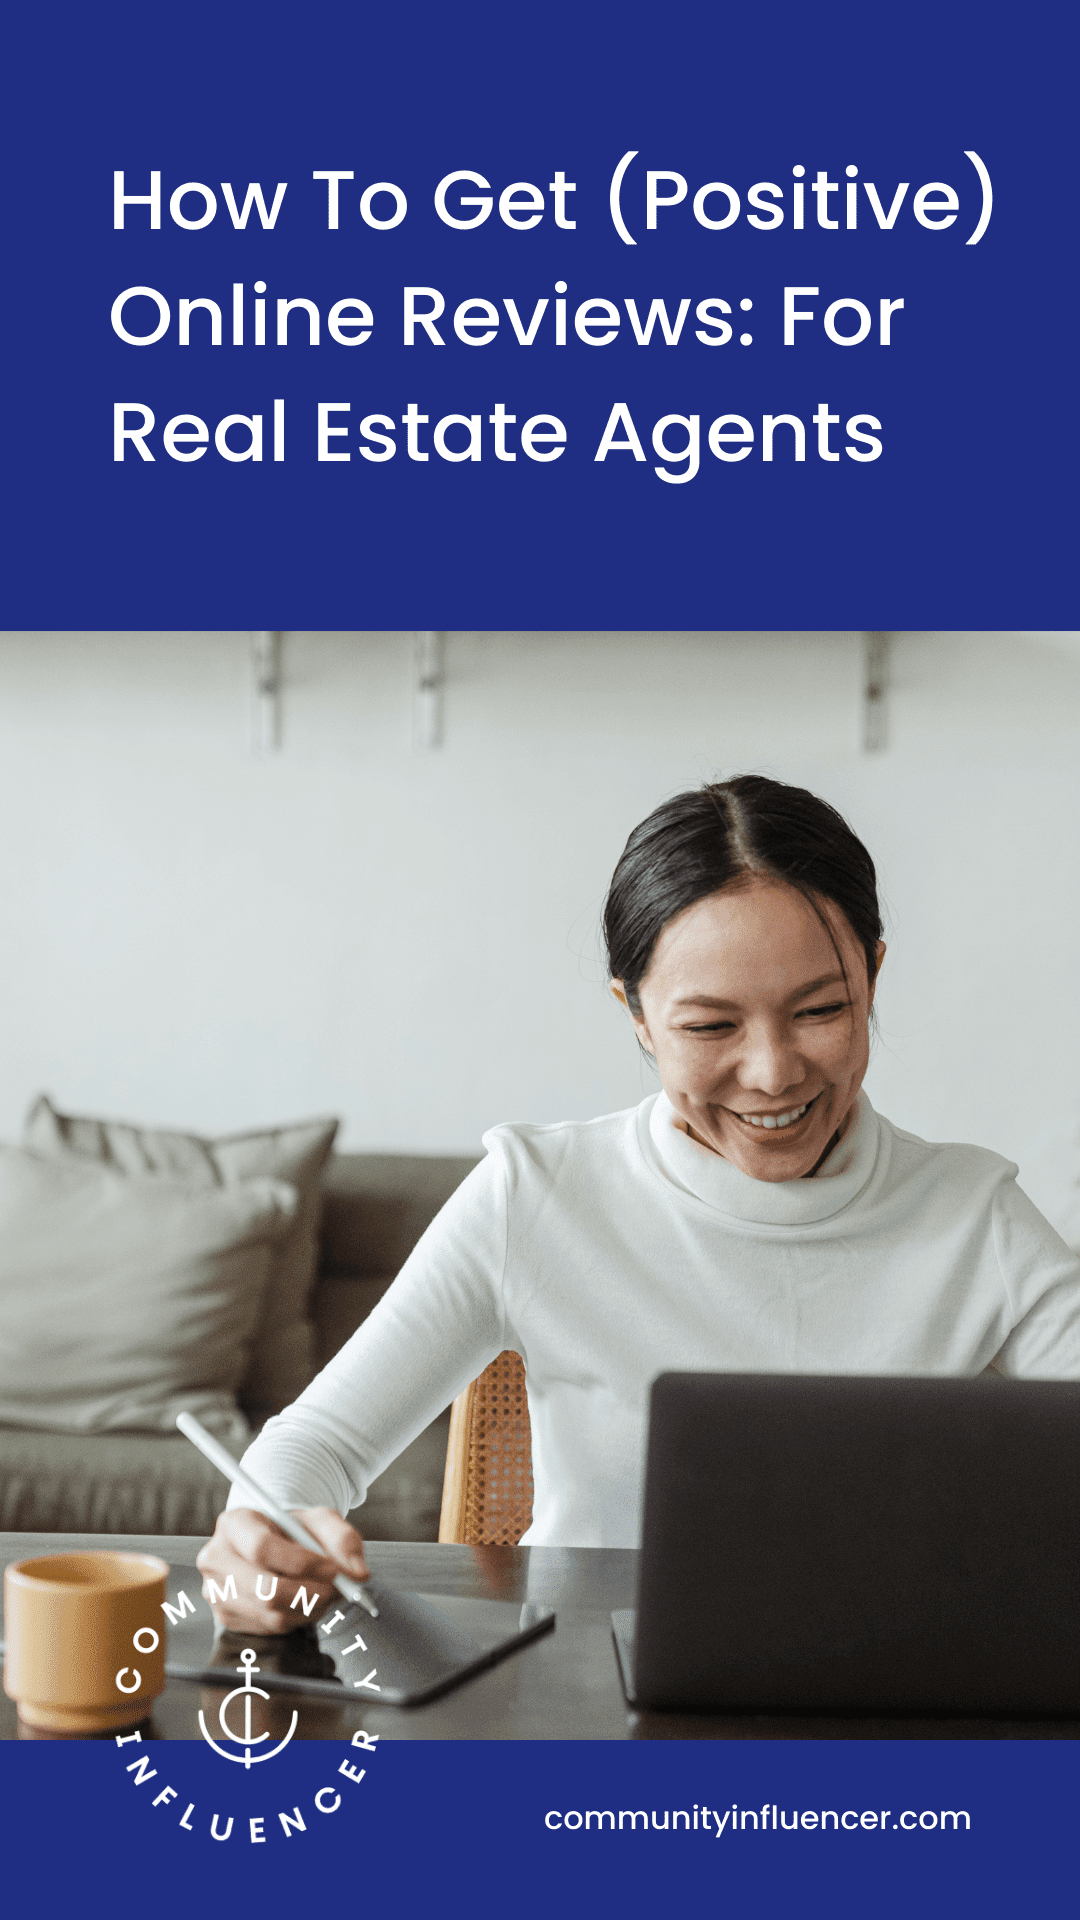 Agent Image Review - Roh Habibi - Best Real Estate Websites for Agents and  Brokers